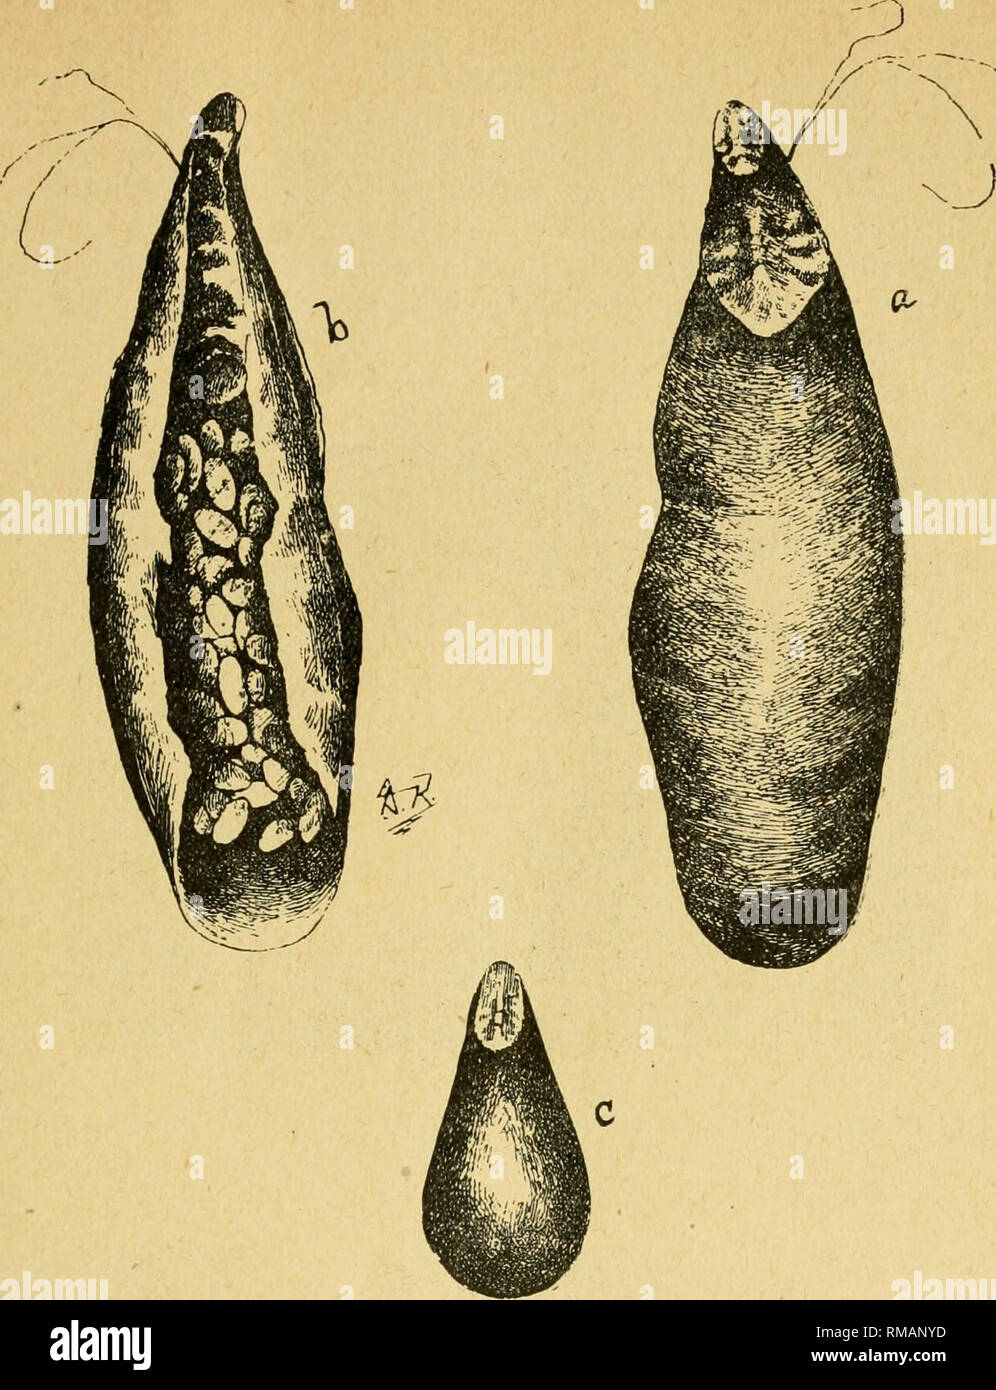 . Annual report. Entomological Society of Ontario; Insect pests; Insects -- Ontario Periodicals. 1907 ENTOMOLOGICAL SOCIETY. 69. Fig. 25. Oyster-sliell Barklouse (Lepidosaphes ulmi). (a) Adult fenaale, back view, showing the two moulted skins at anterior end, and the bristles of the sucking tube; (b) adult female turned over, showing the insect at the anterior end and the eggs^t the posterior end; (c) adult male scale, much smaller than female, with one moulted skin at anterior end. The Scurfy Scale, Chionaspis furfura, (Fitch). Figs. 26 and 27. The Scurfy Scale, though widely distributed thro Stock Photo